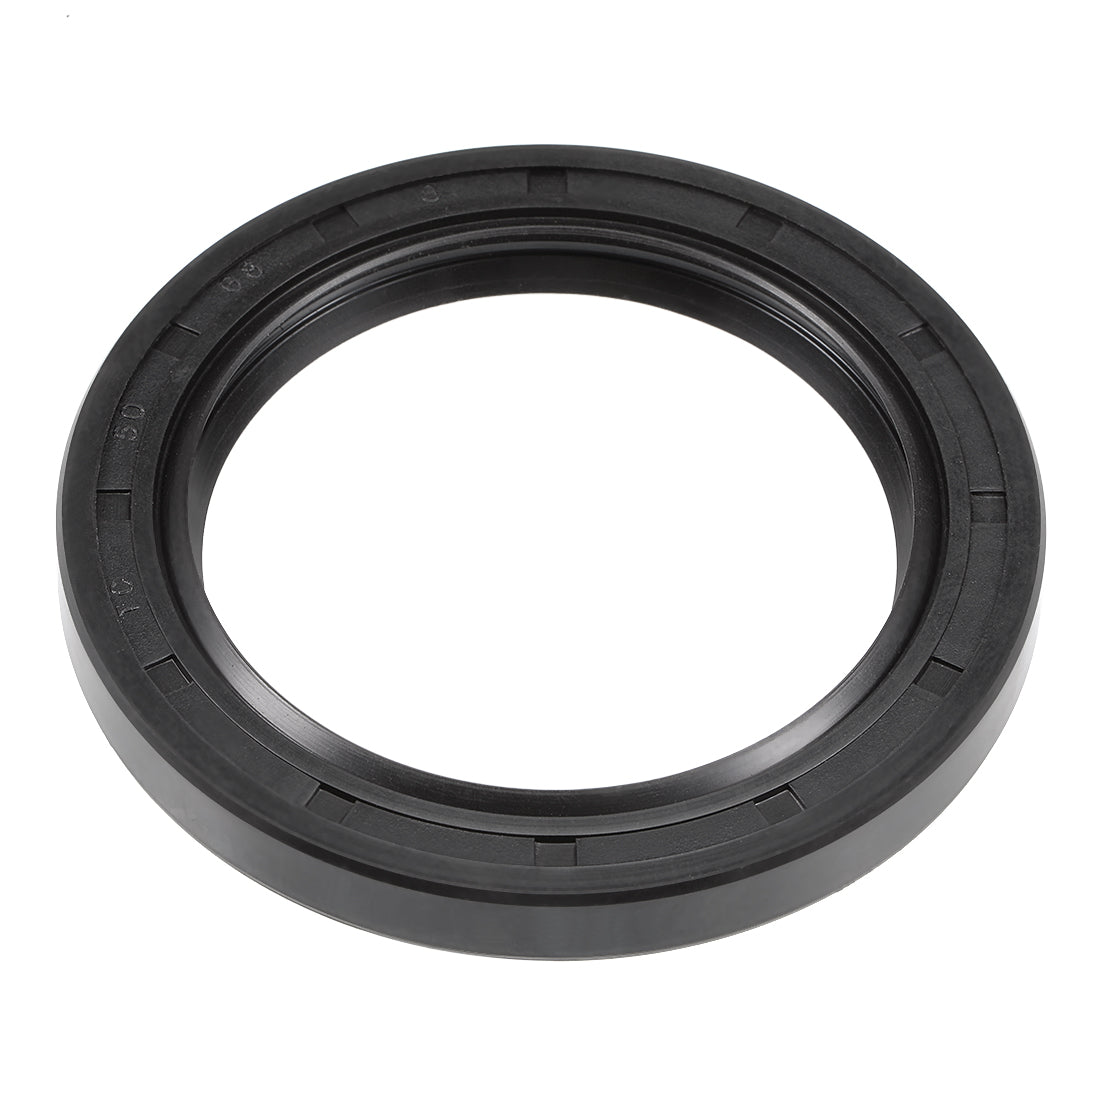 uxcell Uxcell Nitrile Rubber Oil Seals TC Inner Diameter, Nitrile Rubber Cover Double Lip